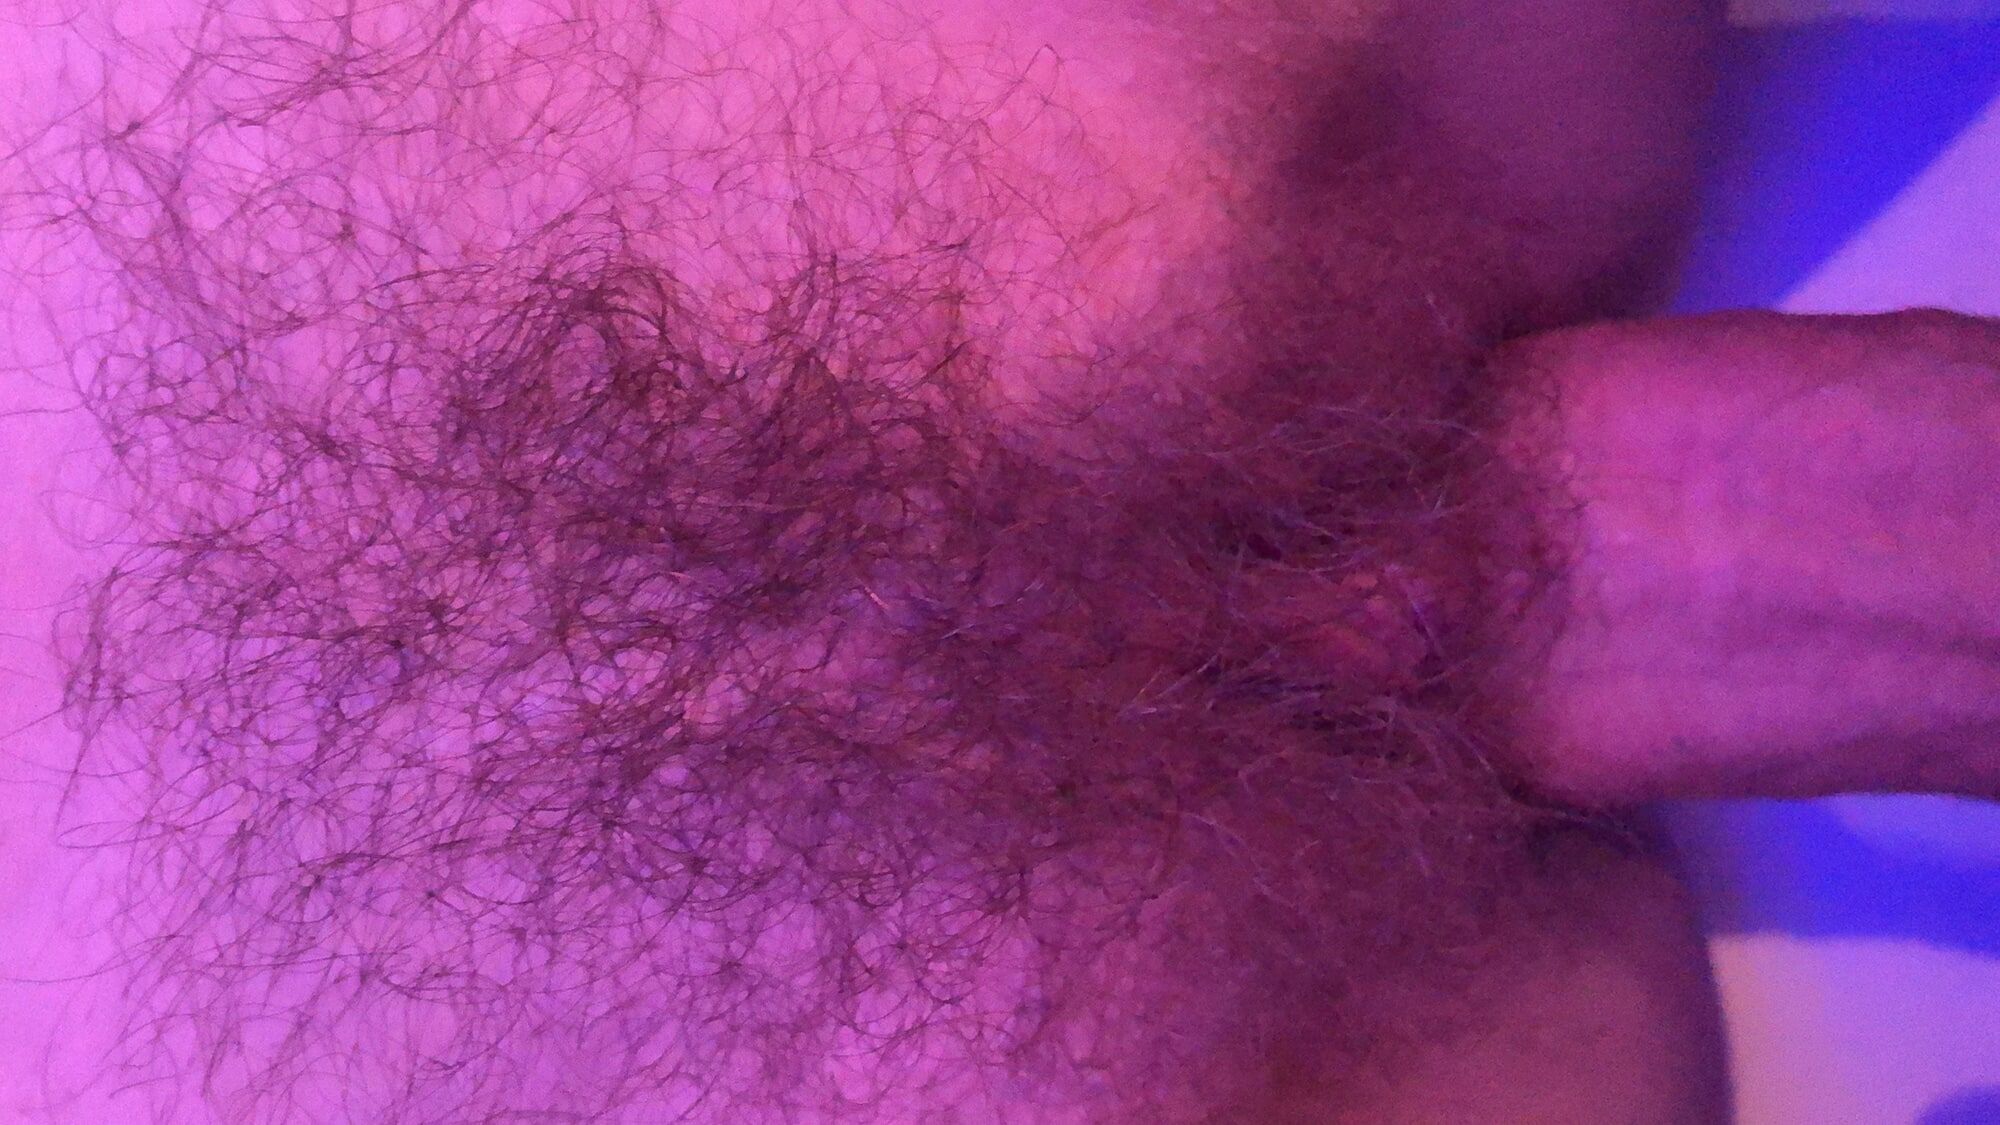 Wife bush over last 18 years, I love her hairy amateur cunt #49